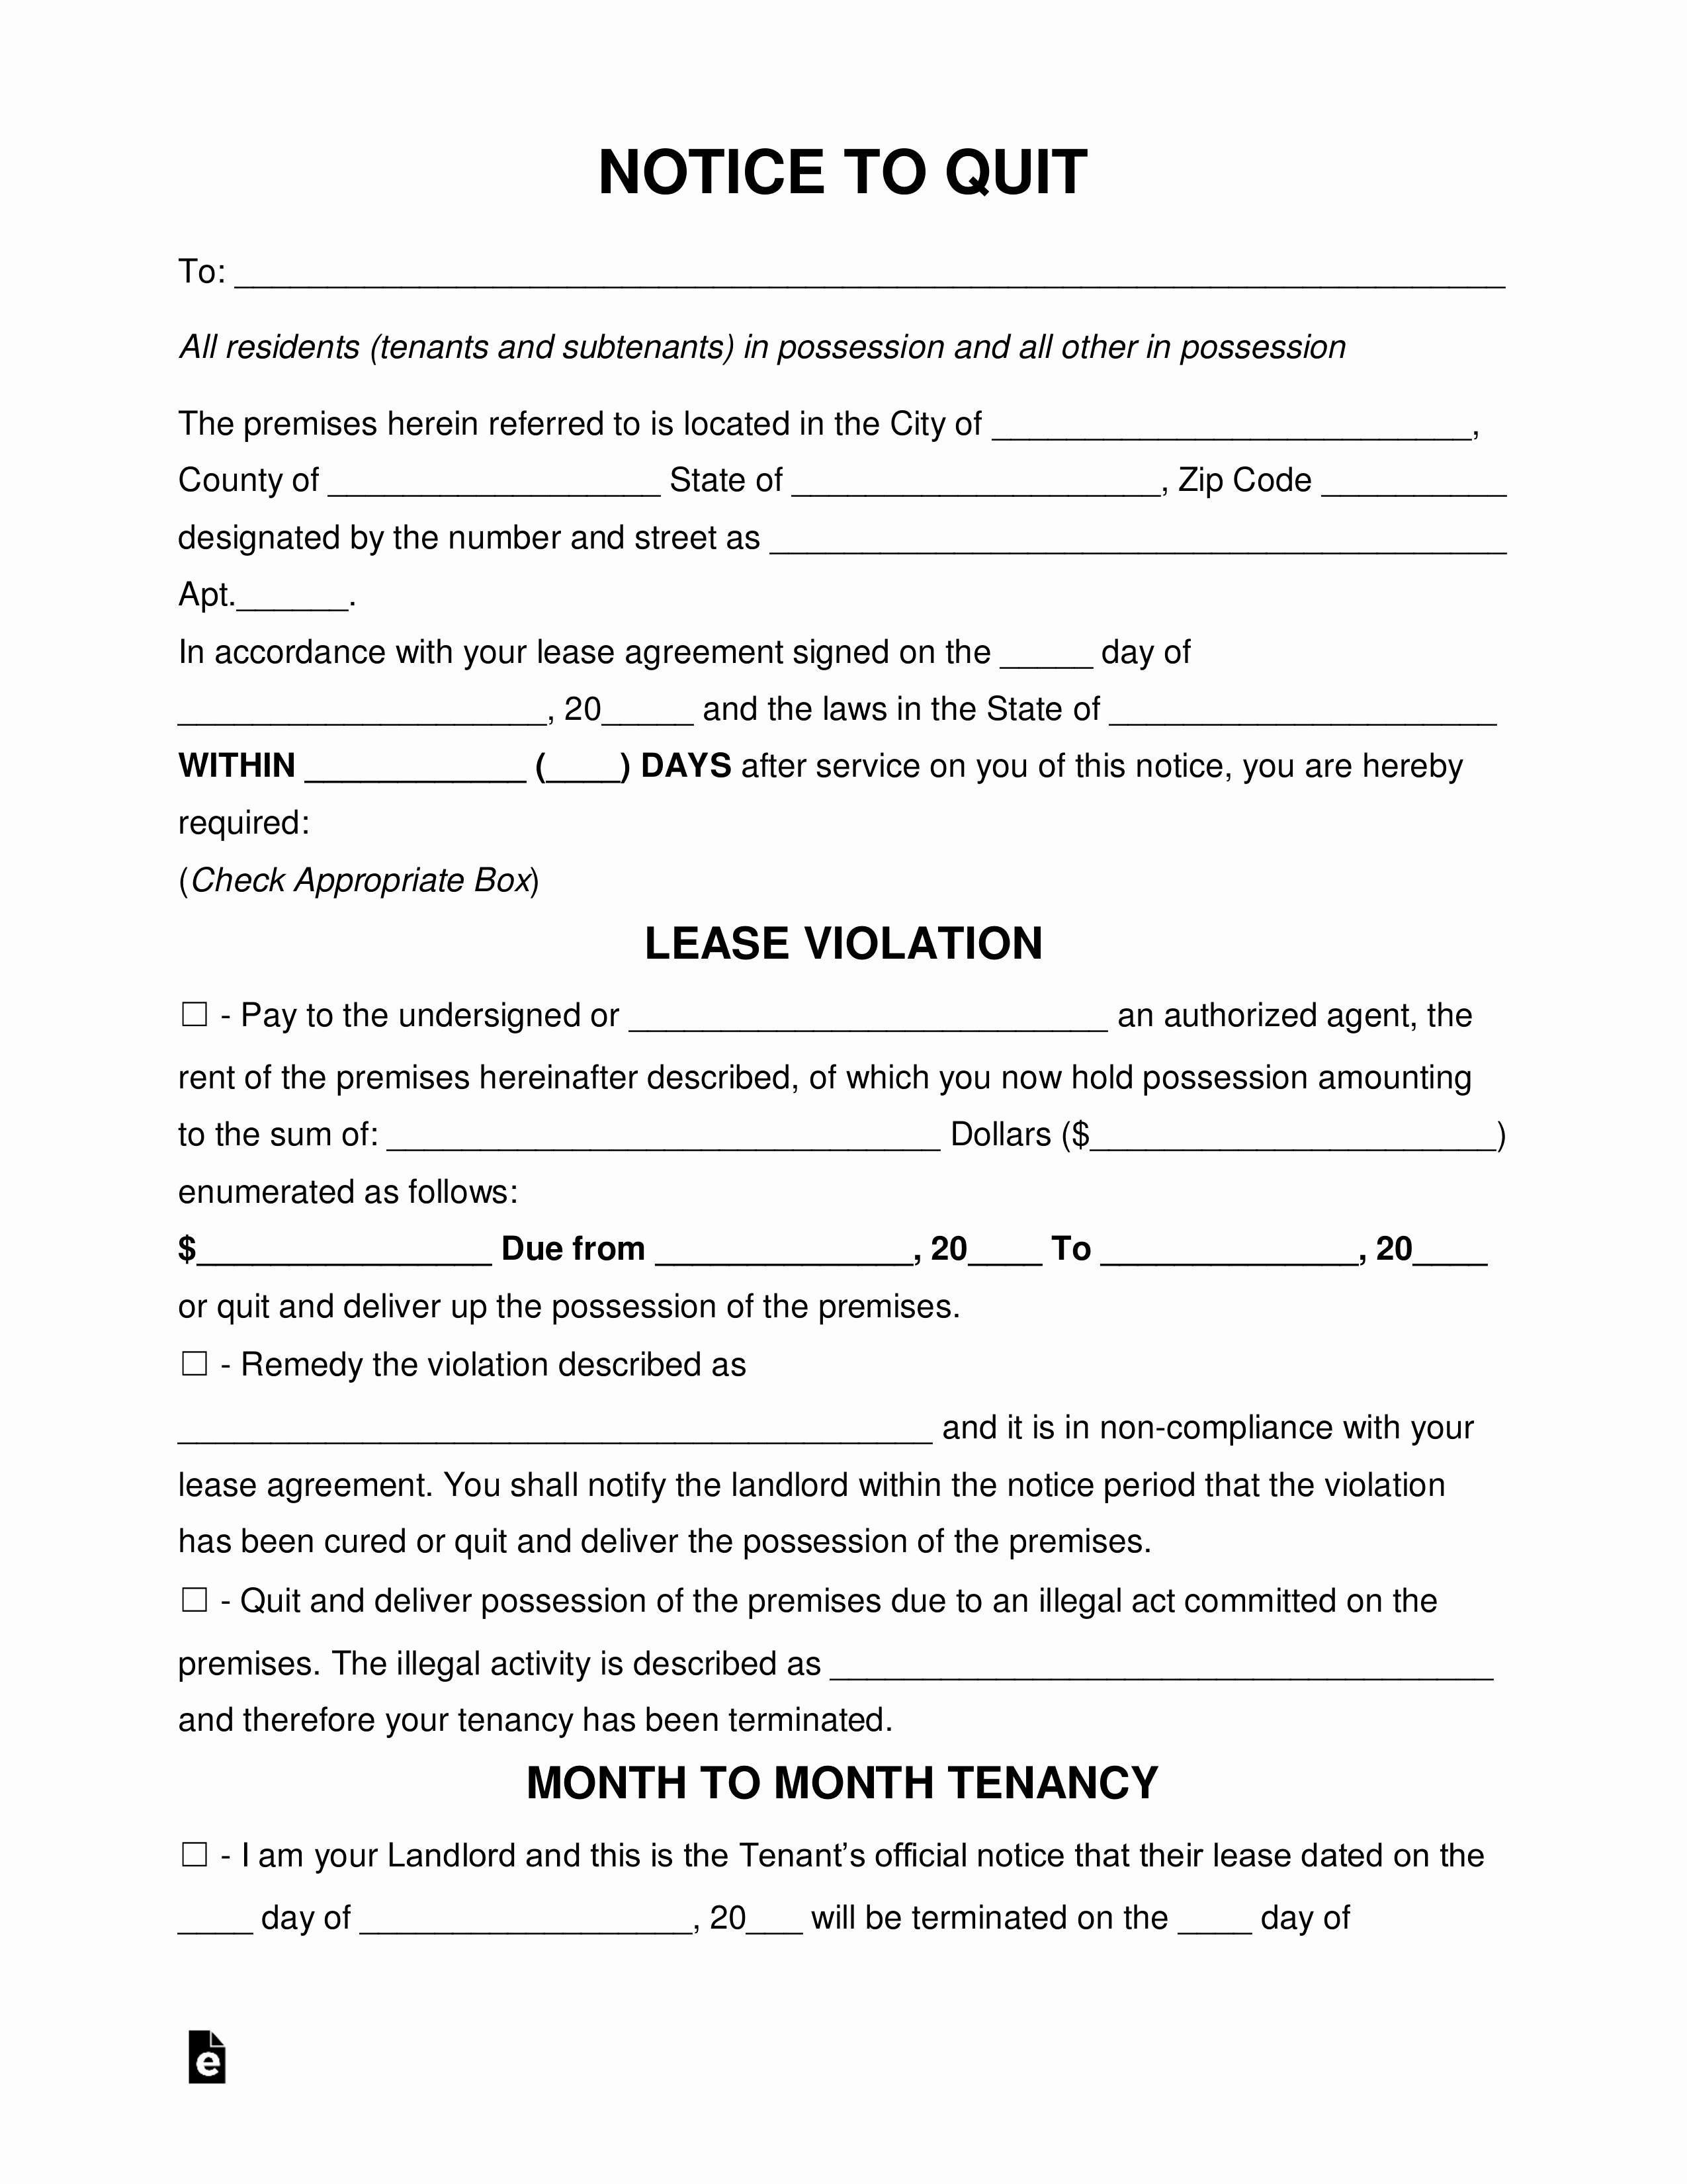 Free Eviction Notices Templates Elegant Free Eviction Notice forms Notices to Quit Pdf